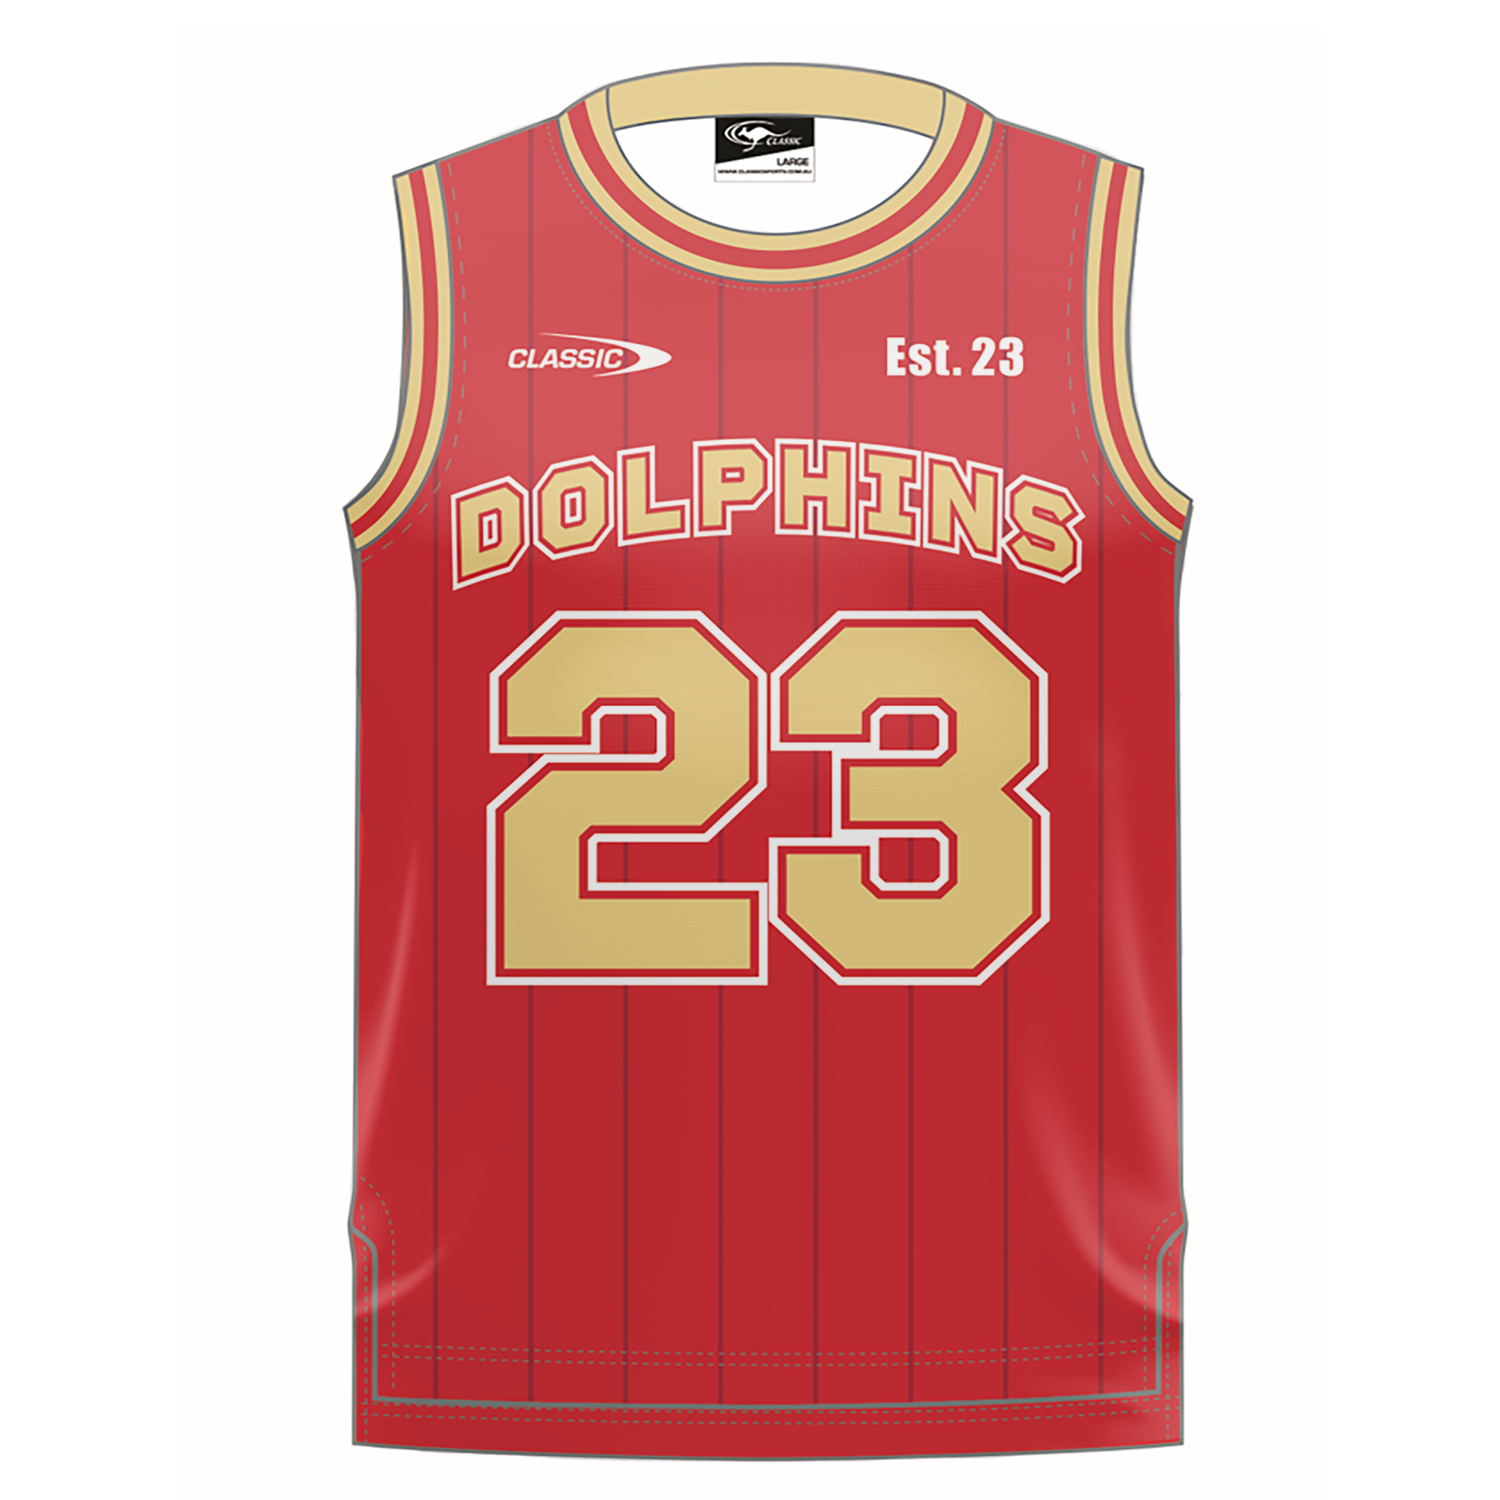 2024 DOLPHINS MENS BASKETBALL SINGLET RED